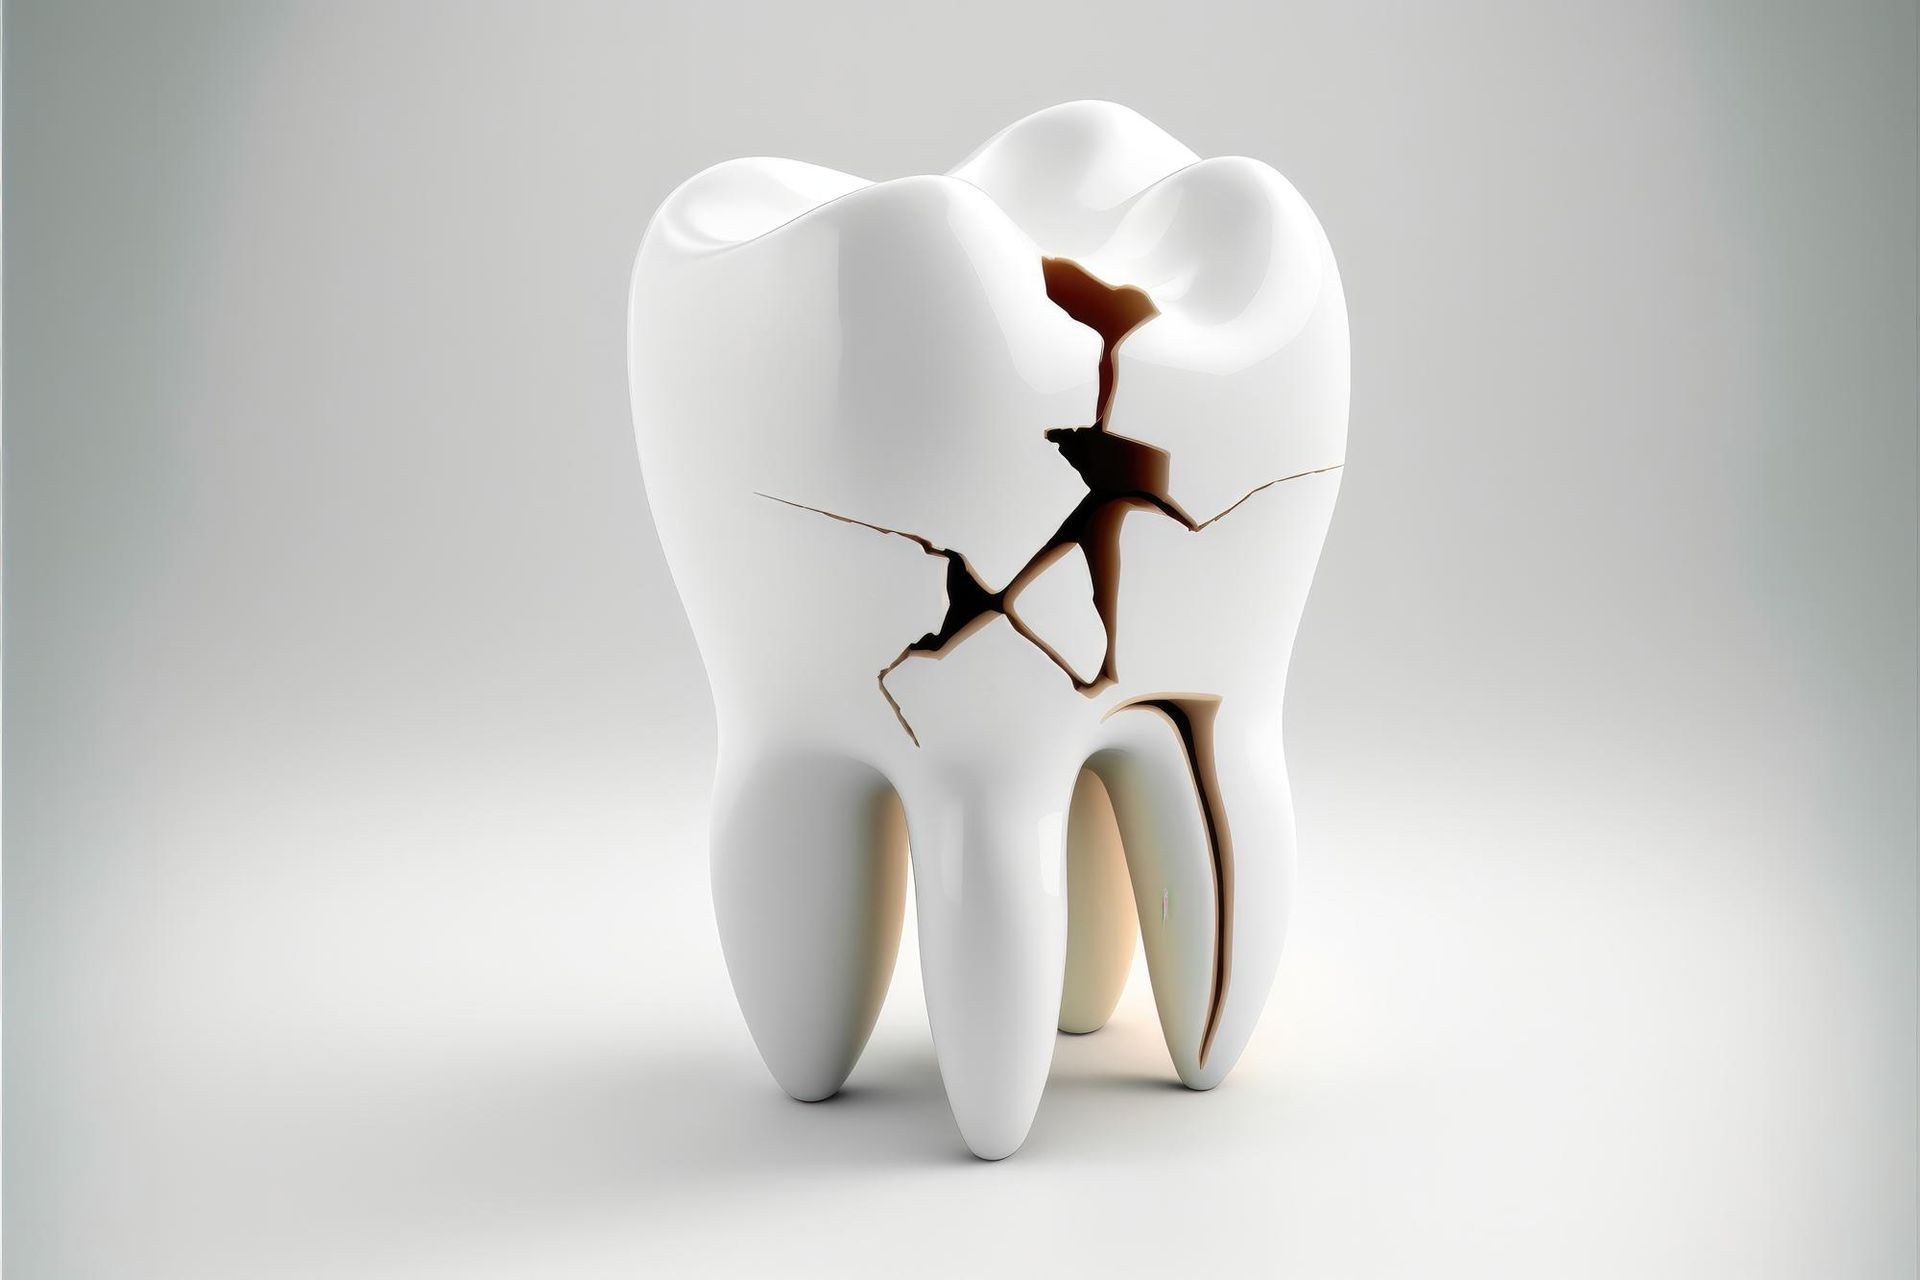  Cracked Tooth